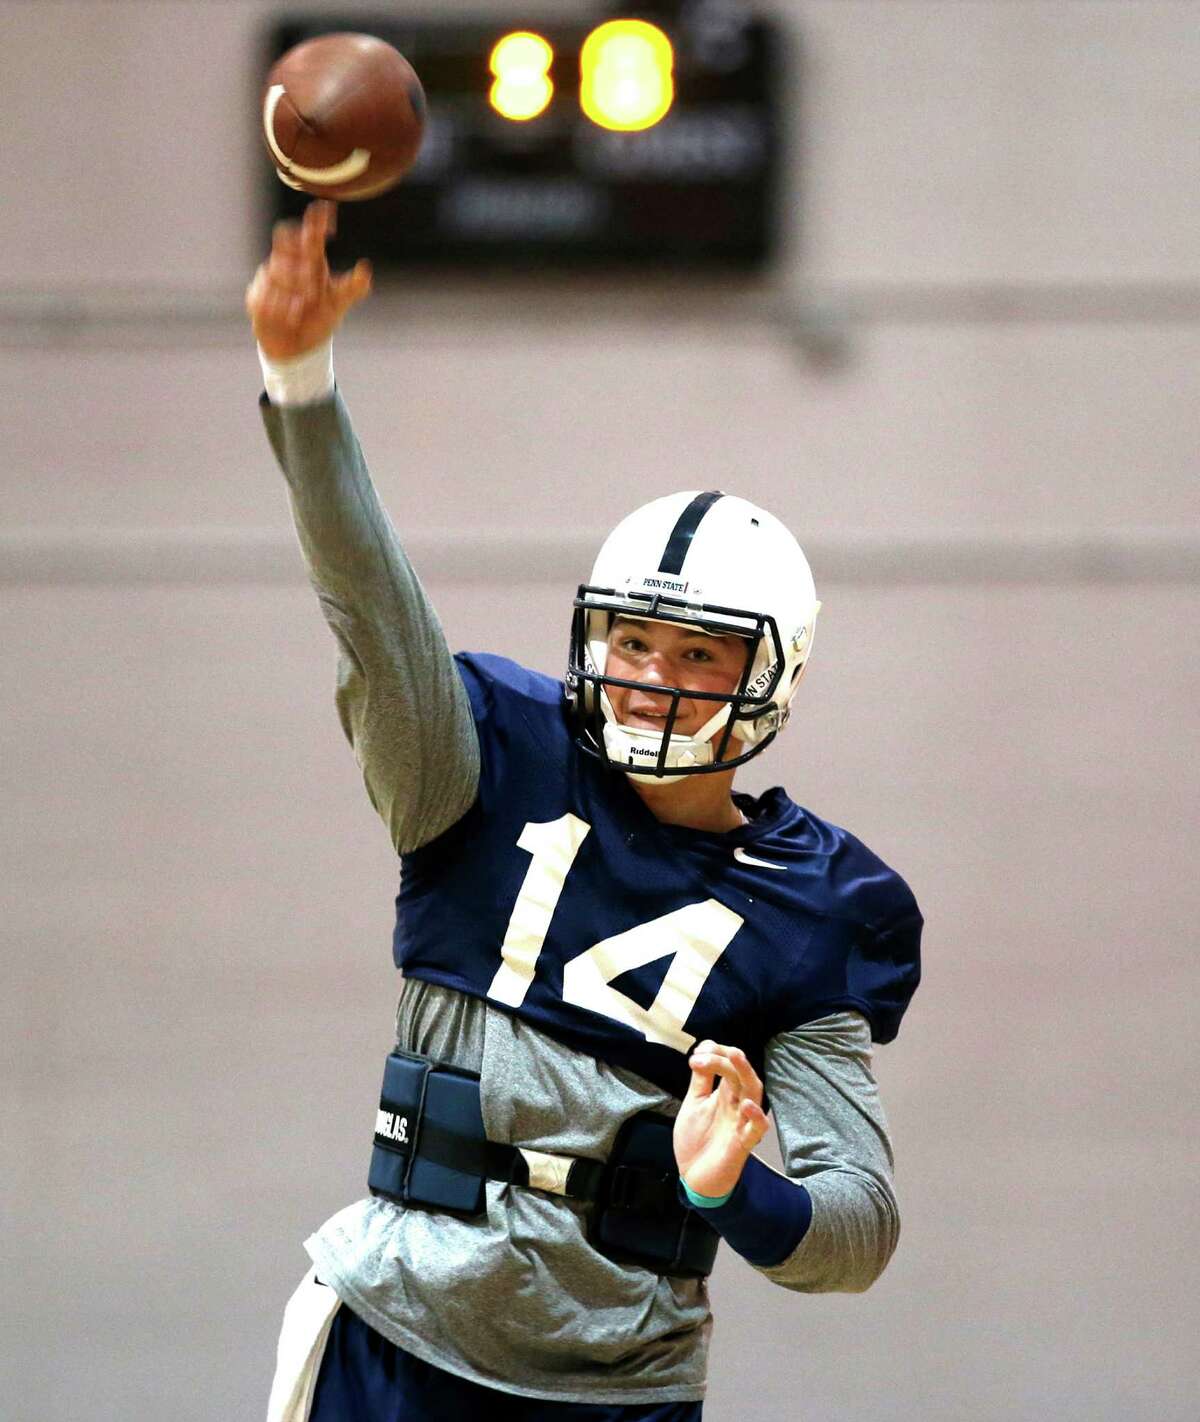 Penn State quarterback Christian Hackenberg throws during NCAA college football practice, Wednesday, Dec. 24, 2014, at Fordham University's Field House in New York. Penn State is scheduled to play Boston College in the Pinstripe Bowl on Saturday. (AP Photo/Kathy Willens)